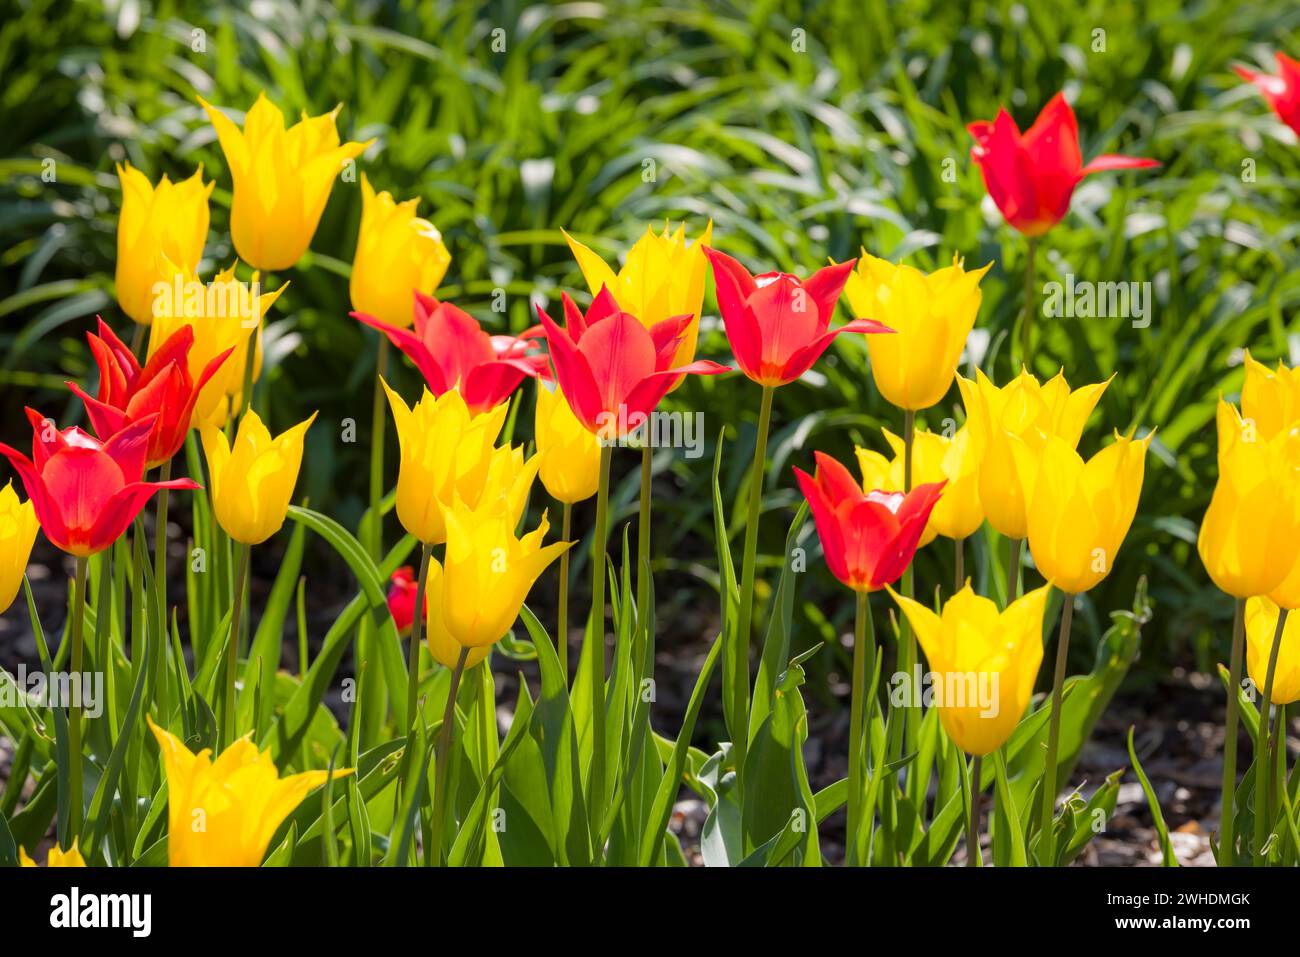 Yellow and red fluted lily tulips (tulipa) in an English garden flowerbed. York, UK Stock Photo